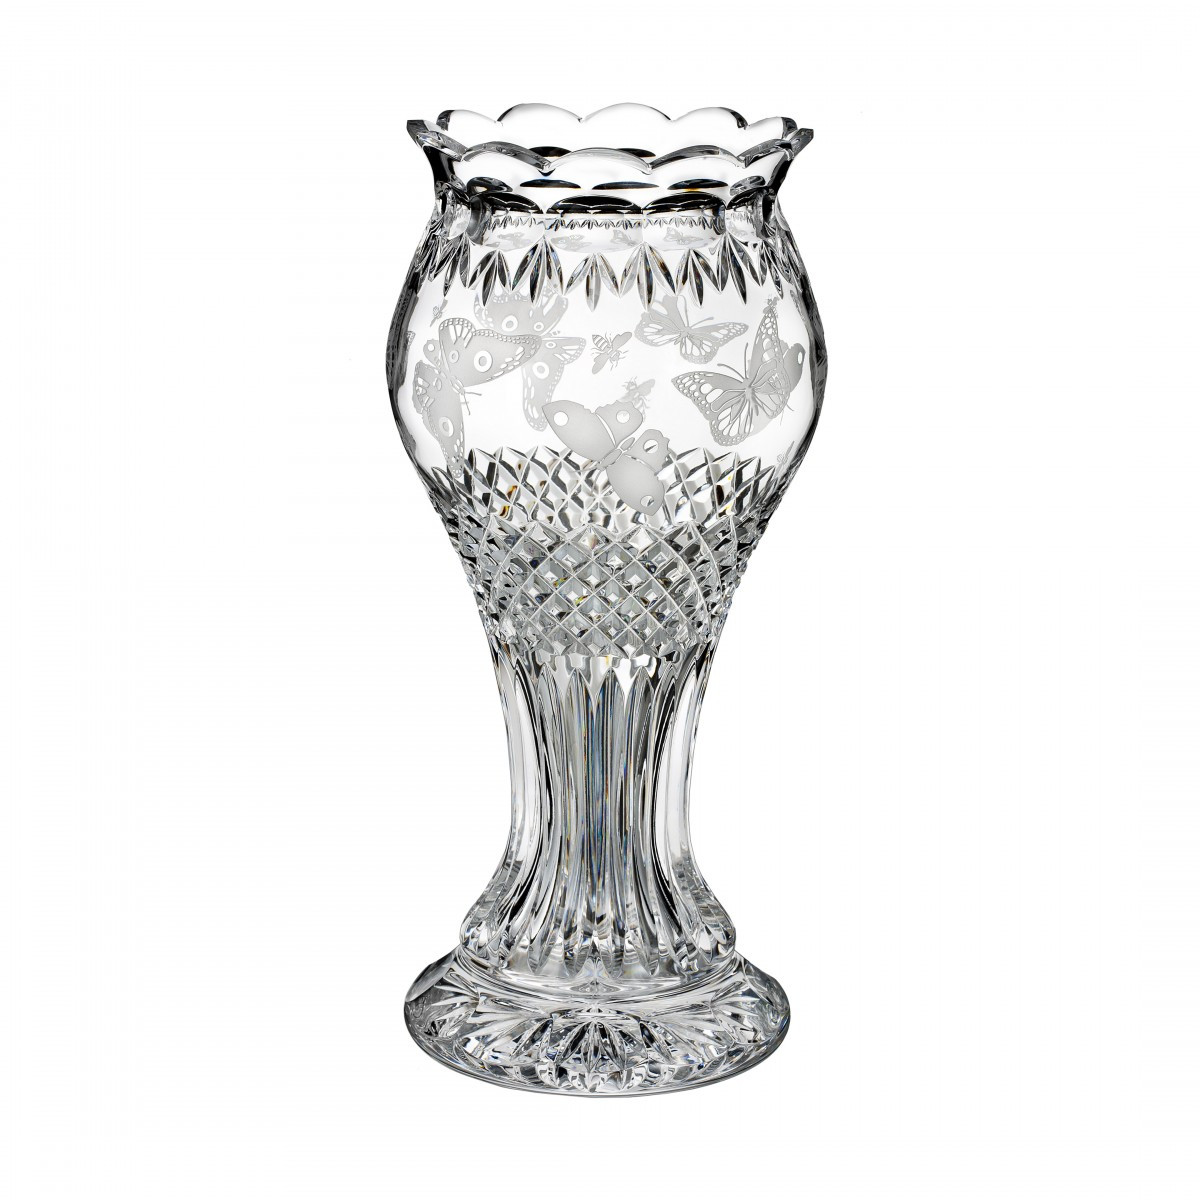 marquis by waterford 9 markham vase of martin ryan butter bee 14in vase house of waterford crystal us throughout martin ryan butter bee 14in vase